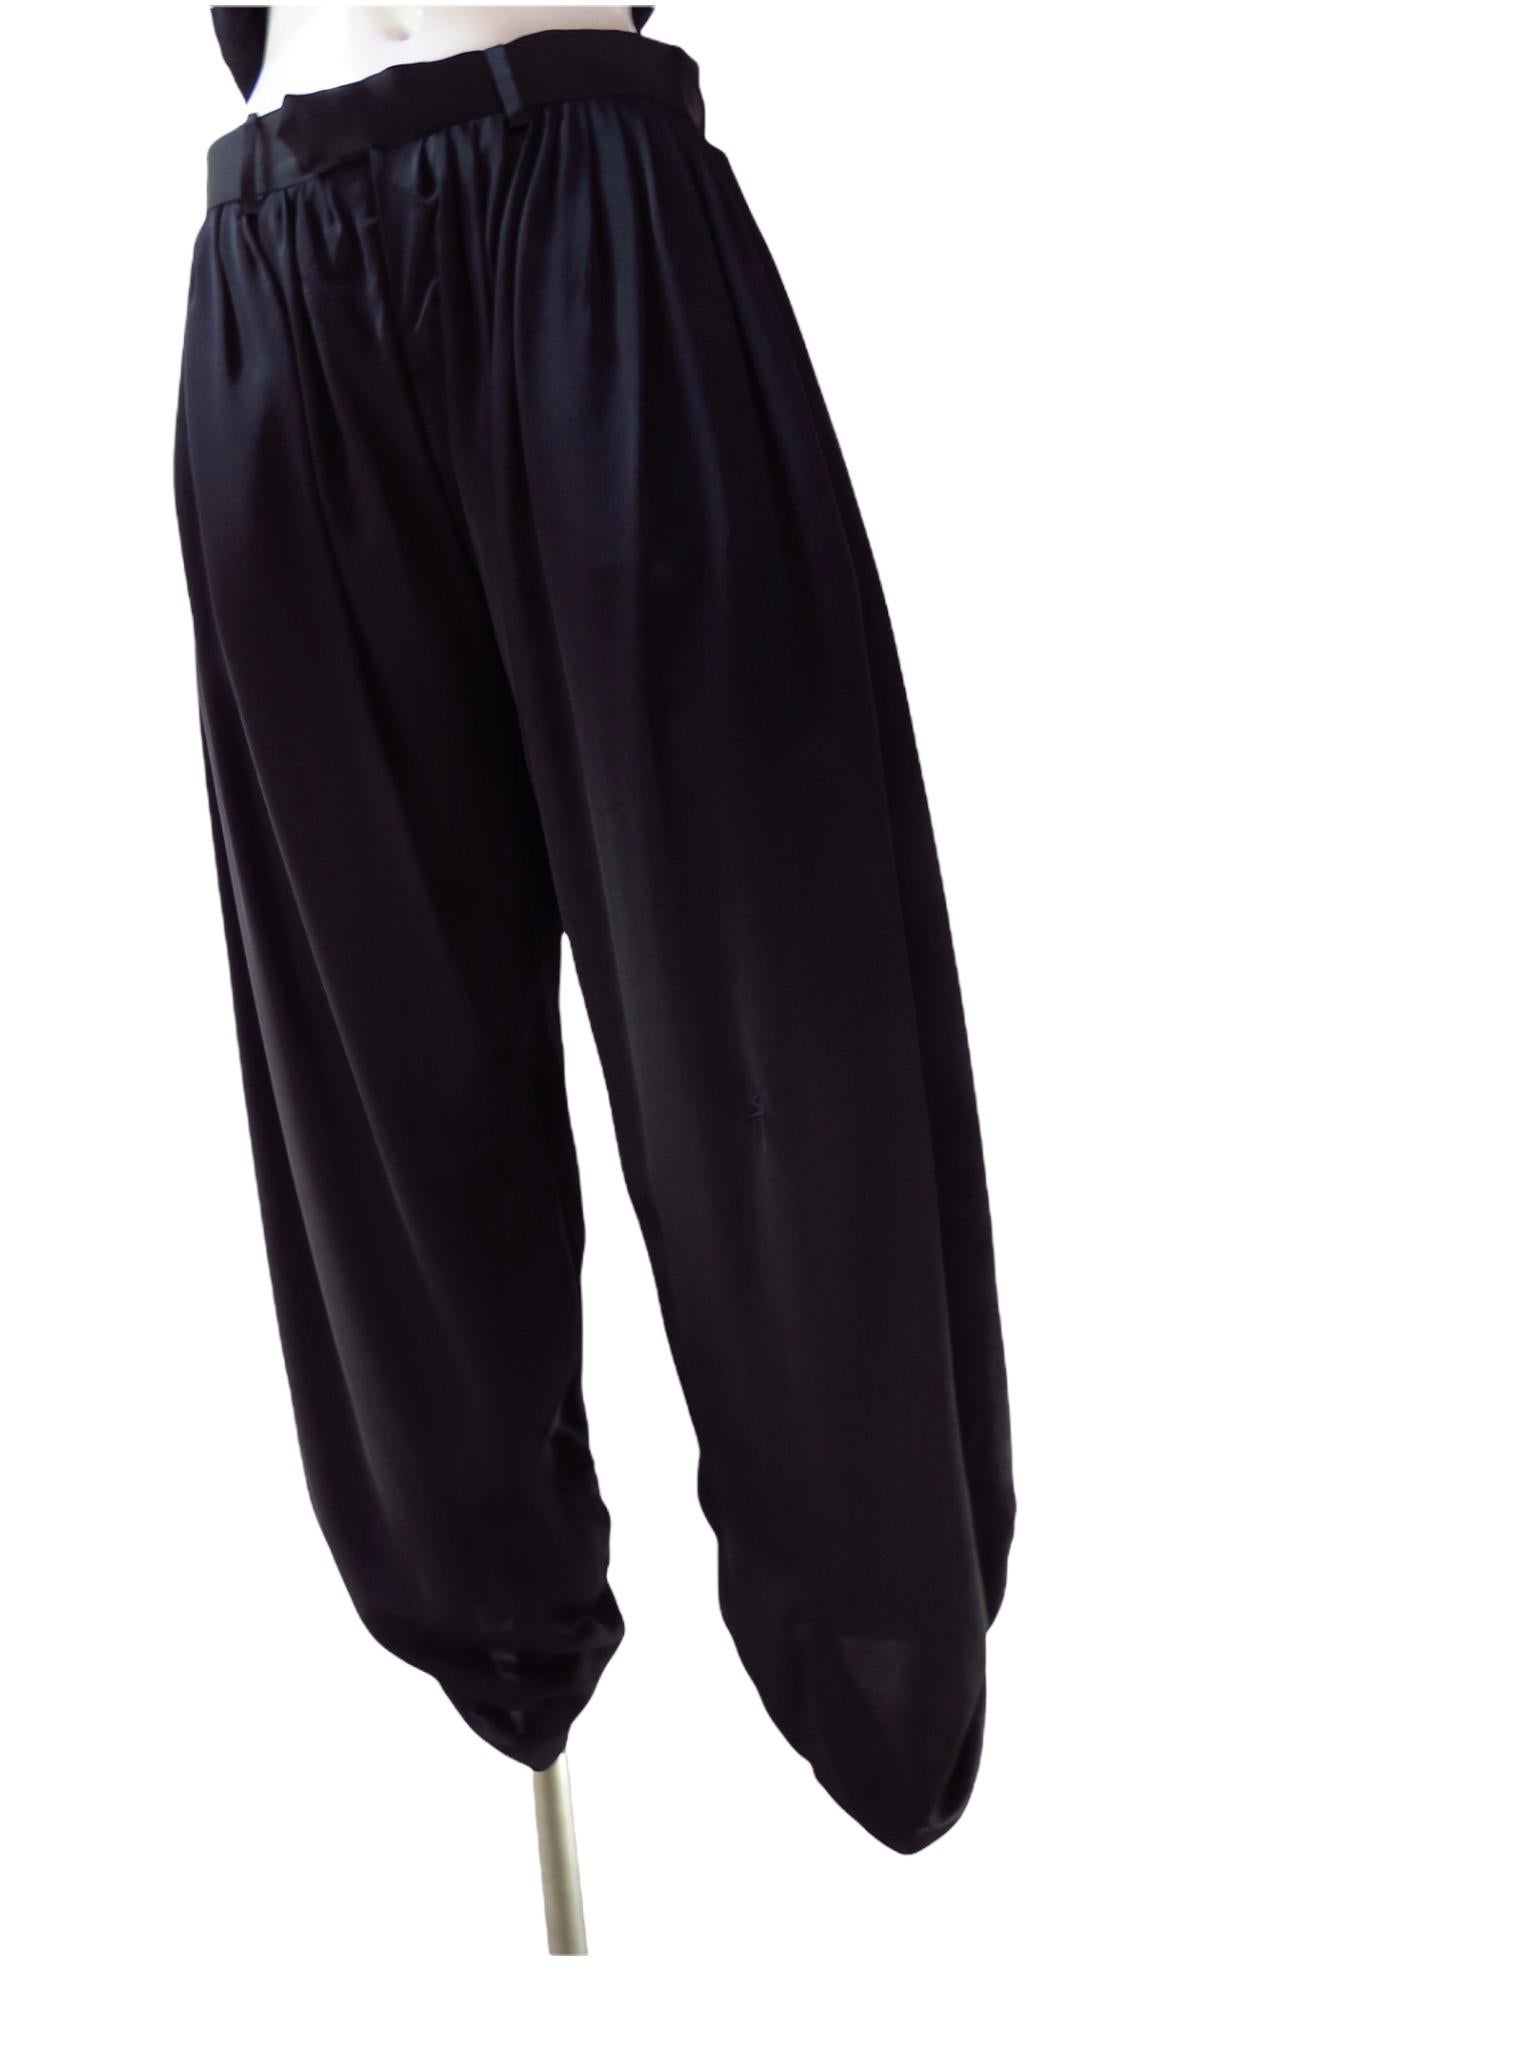 Undercover Black Pleated Silk Harem Pants For Sale 1